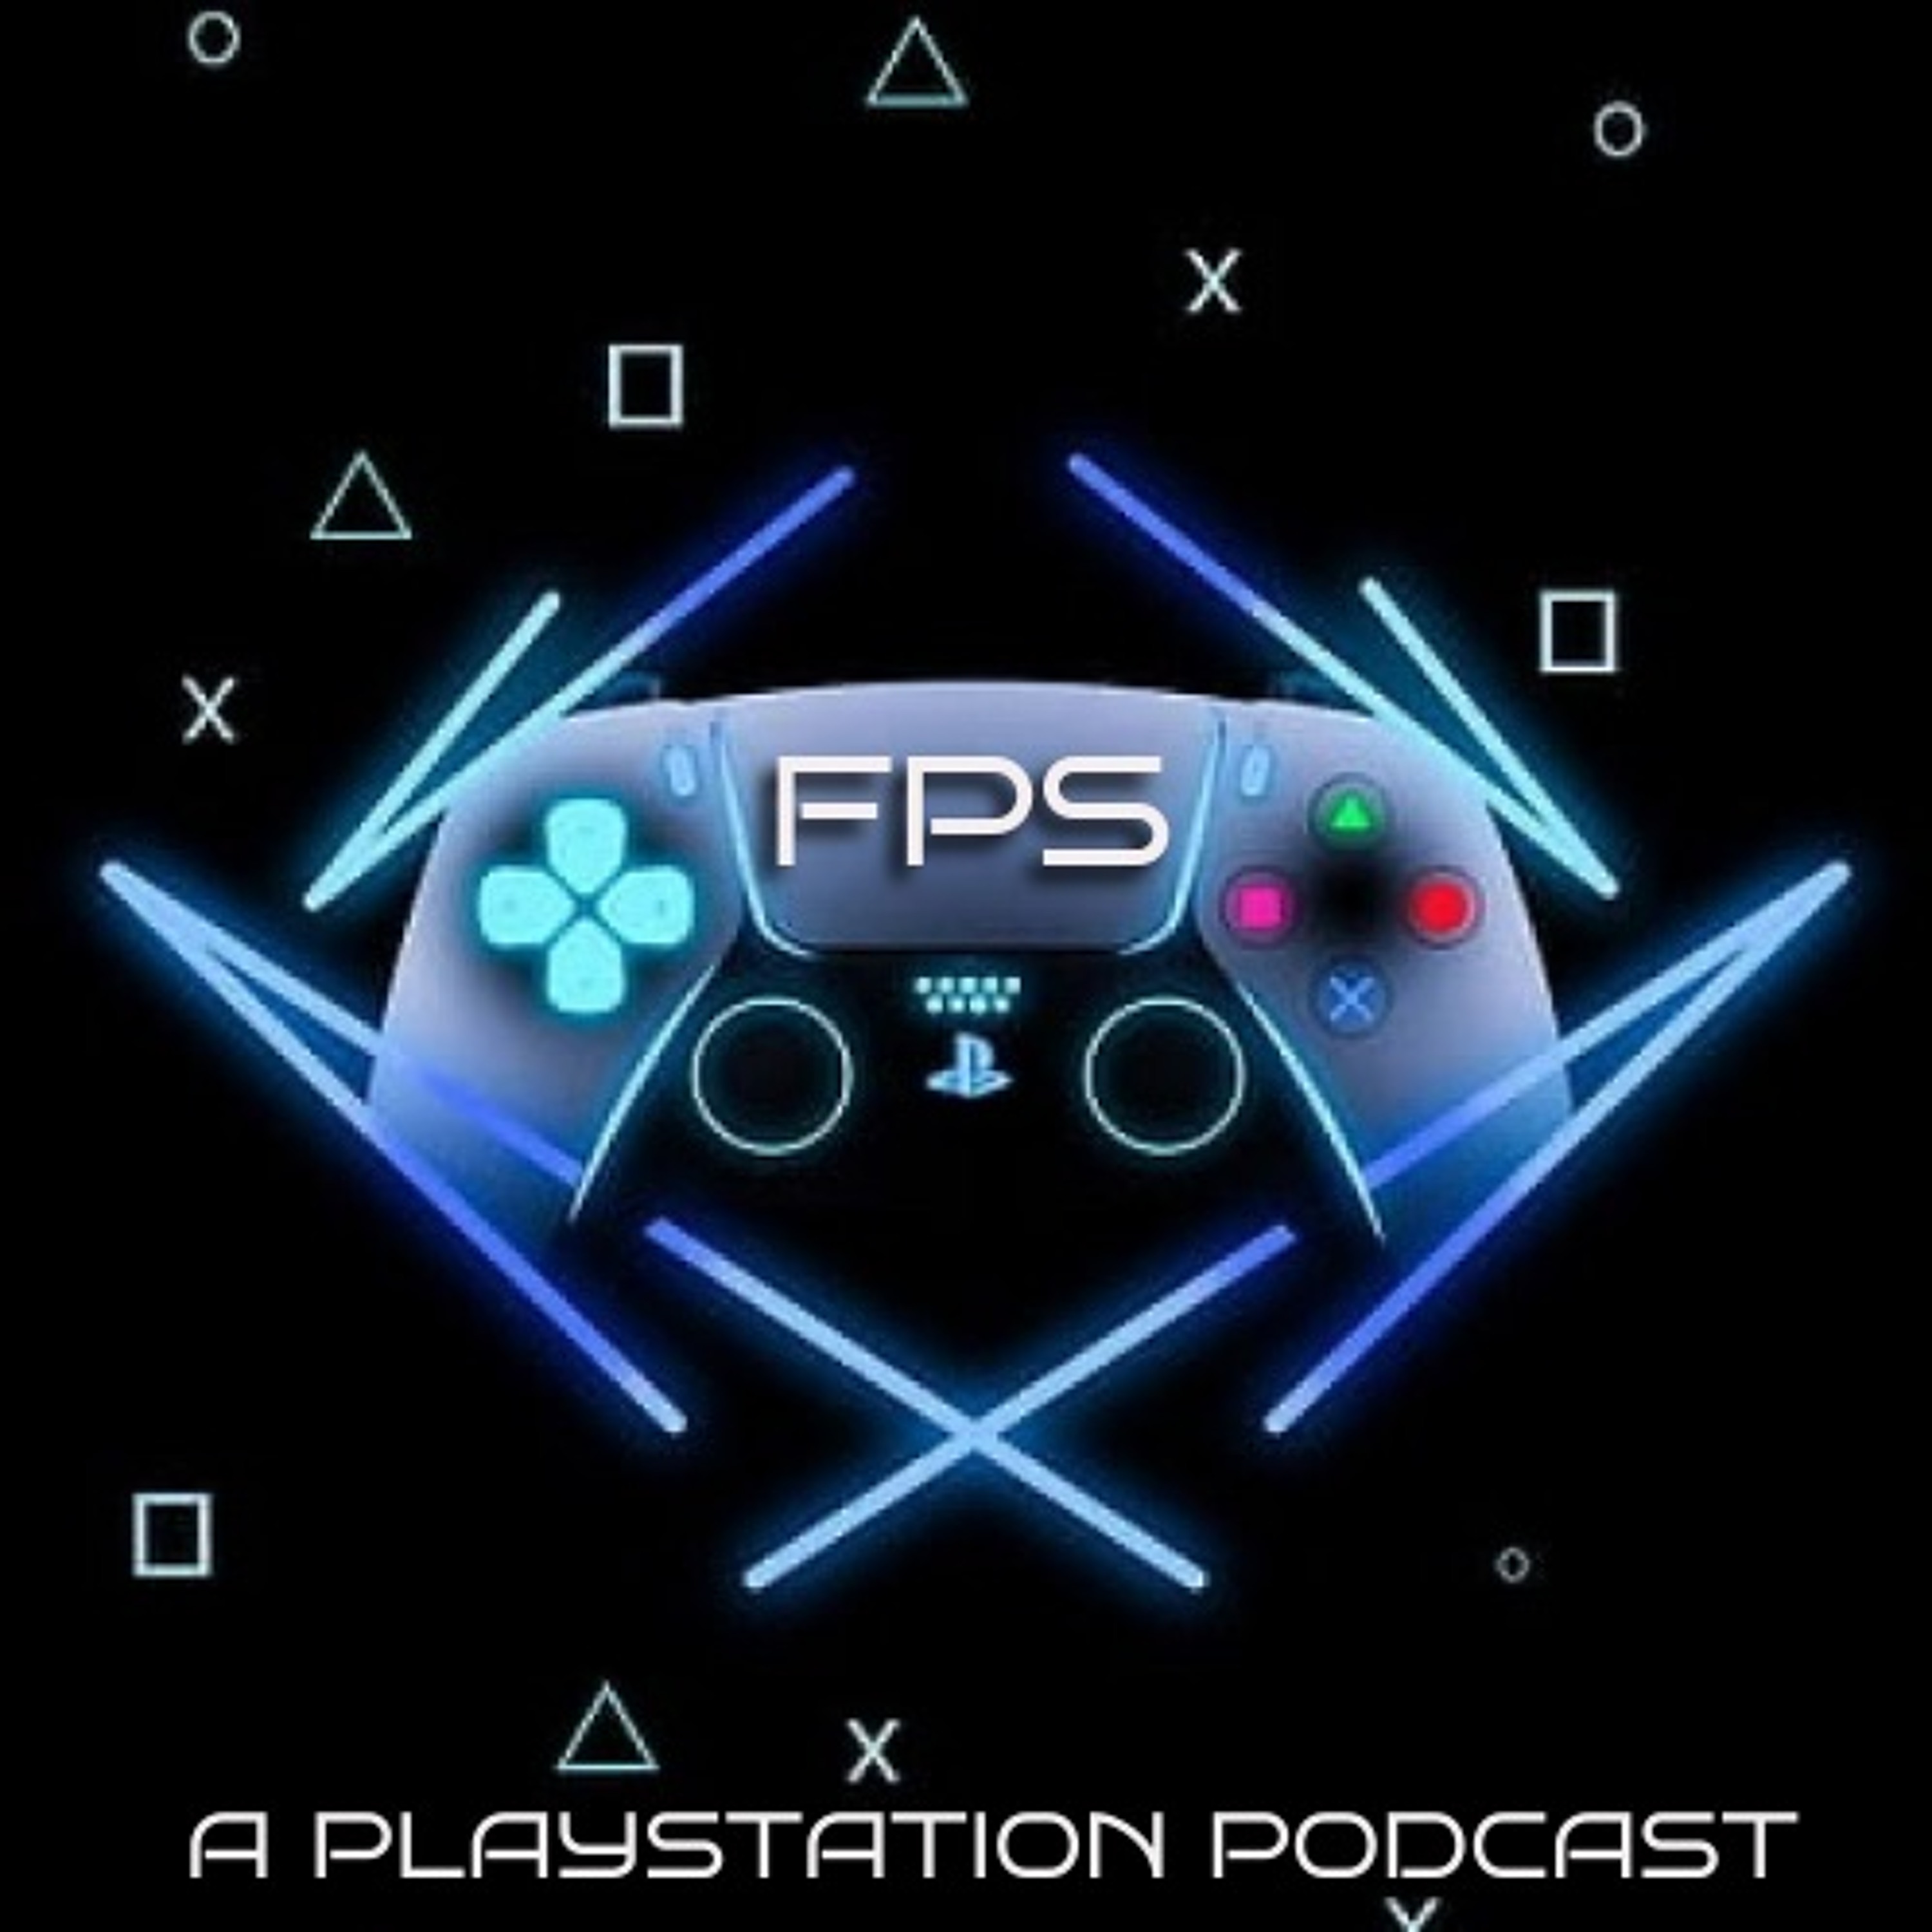 A Father’s PlayStation Ep: 186 - Gaming Like A Pro